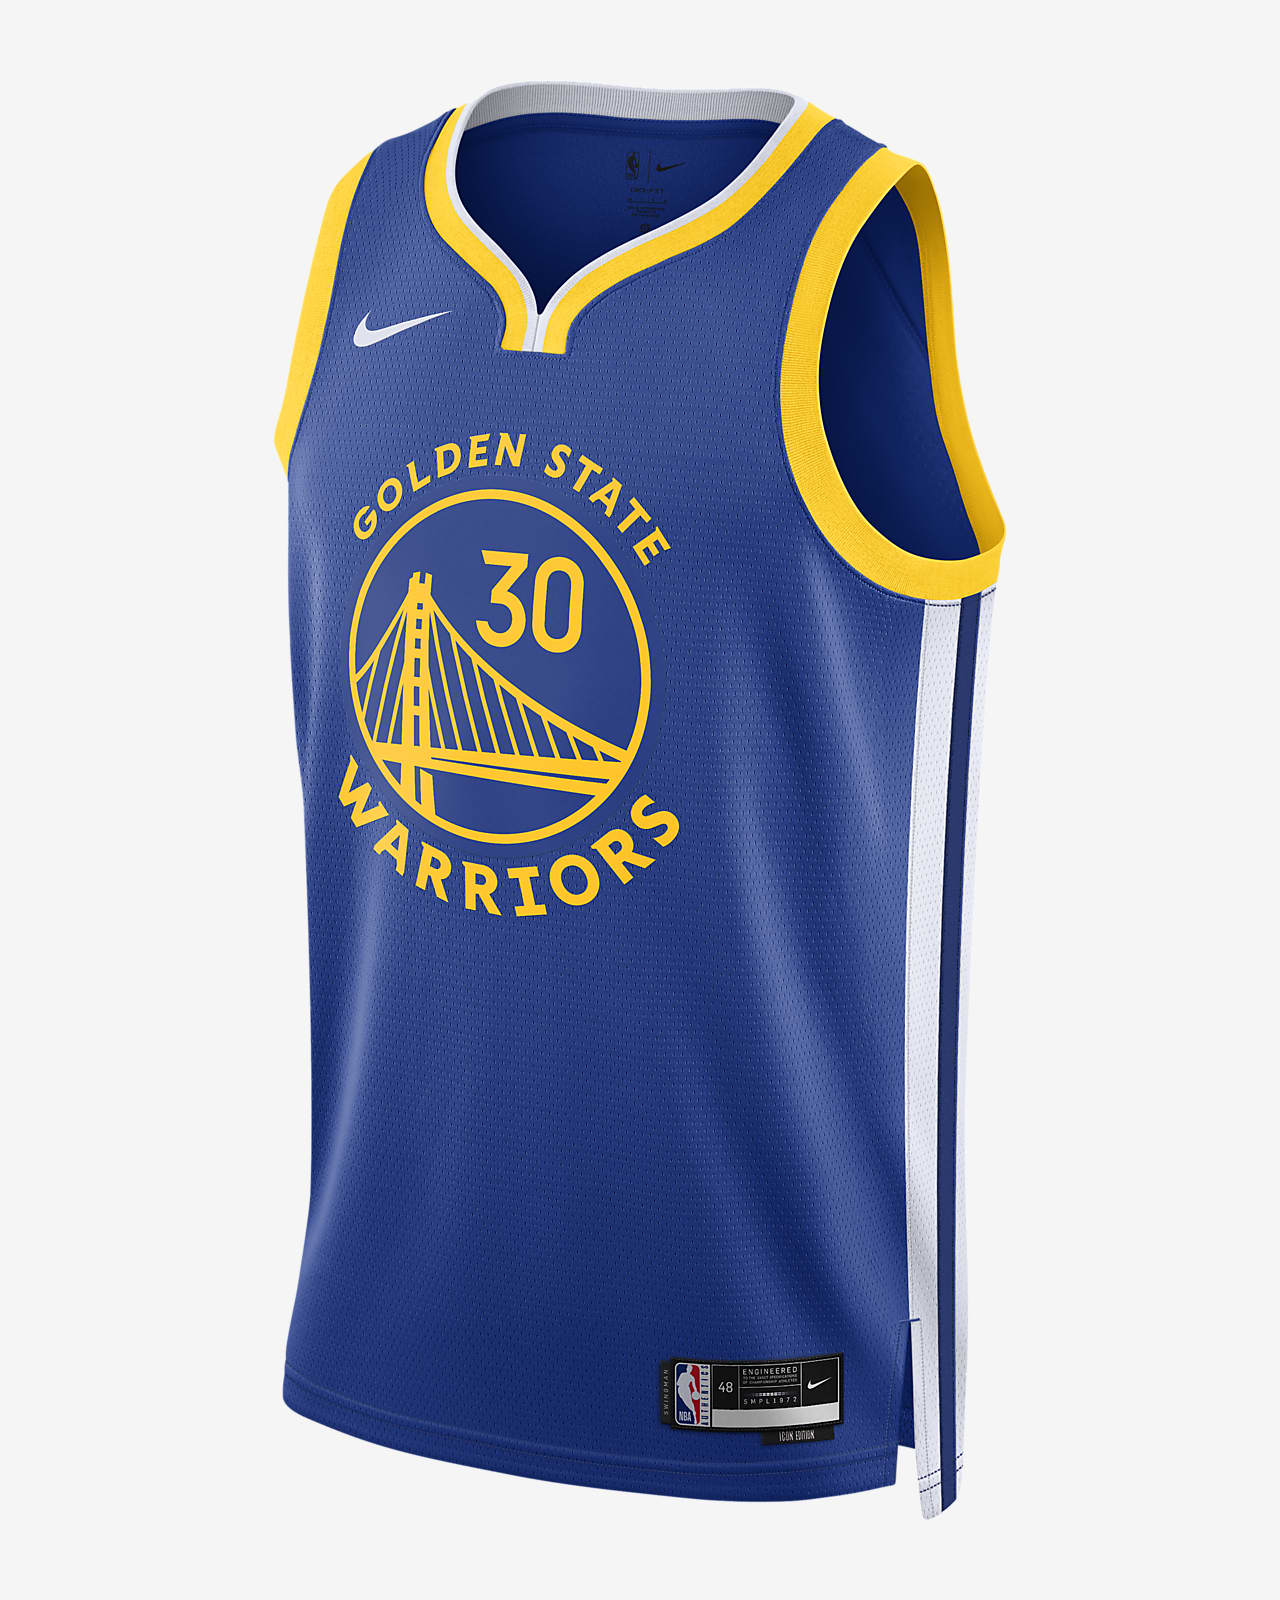 Maillot Nike Dri-FIT NBA Swingman Golden State Warriors Icon Edition 2022/23 pour homme